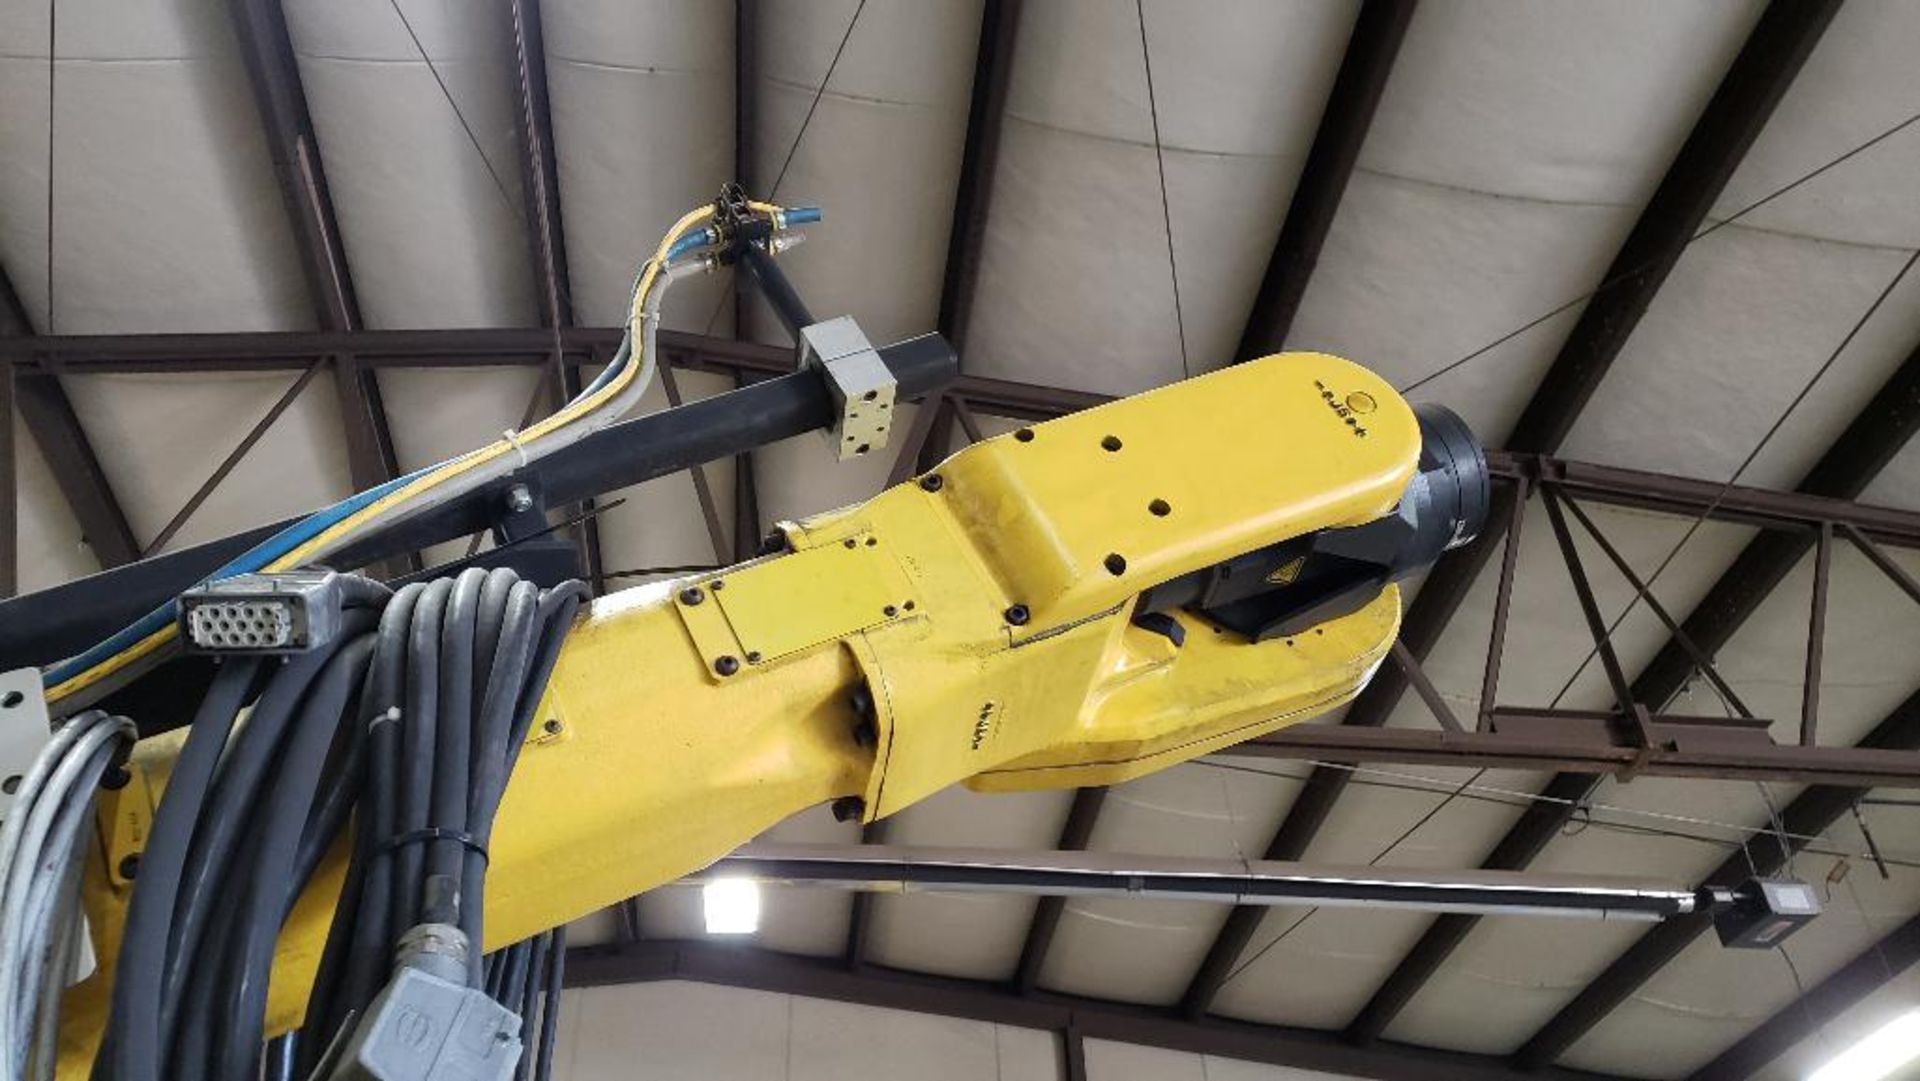 Fanuc S-420iW robot 6-axis arm. - Image 4 of 9